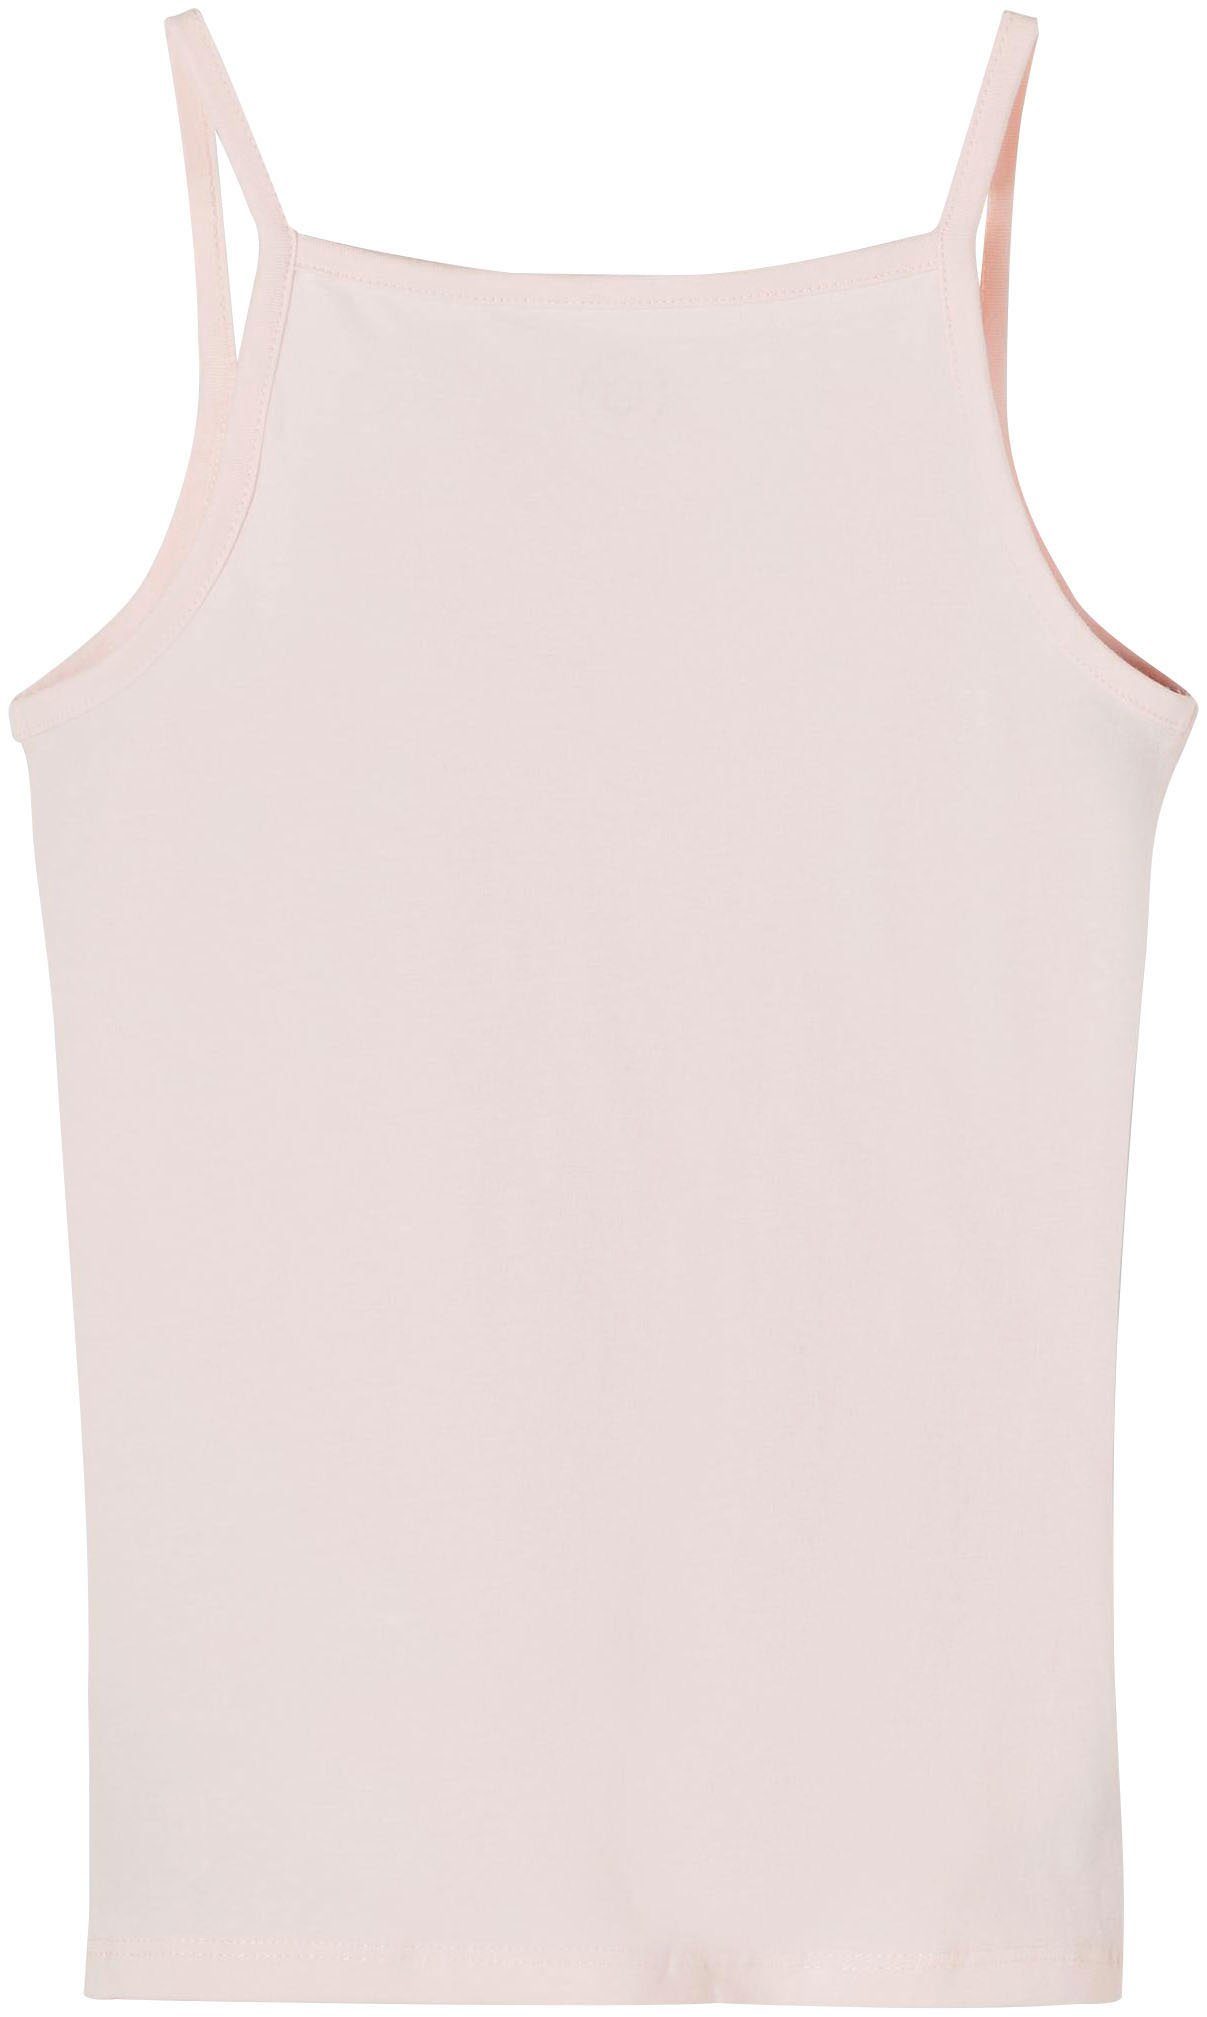 NOOS TOP Unterhemd 2-St) NKFSTRAP (Packung, 2P pink It Name barely